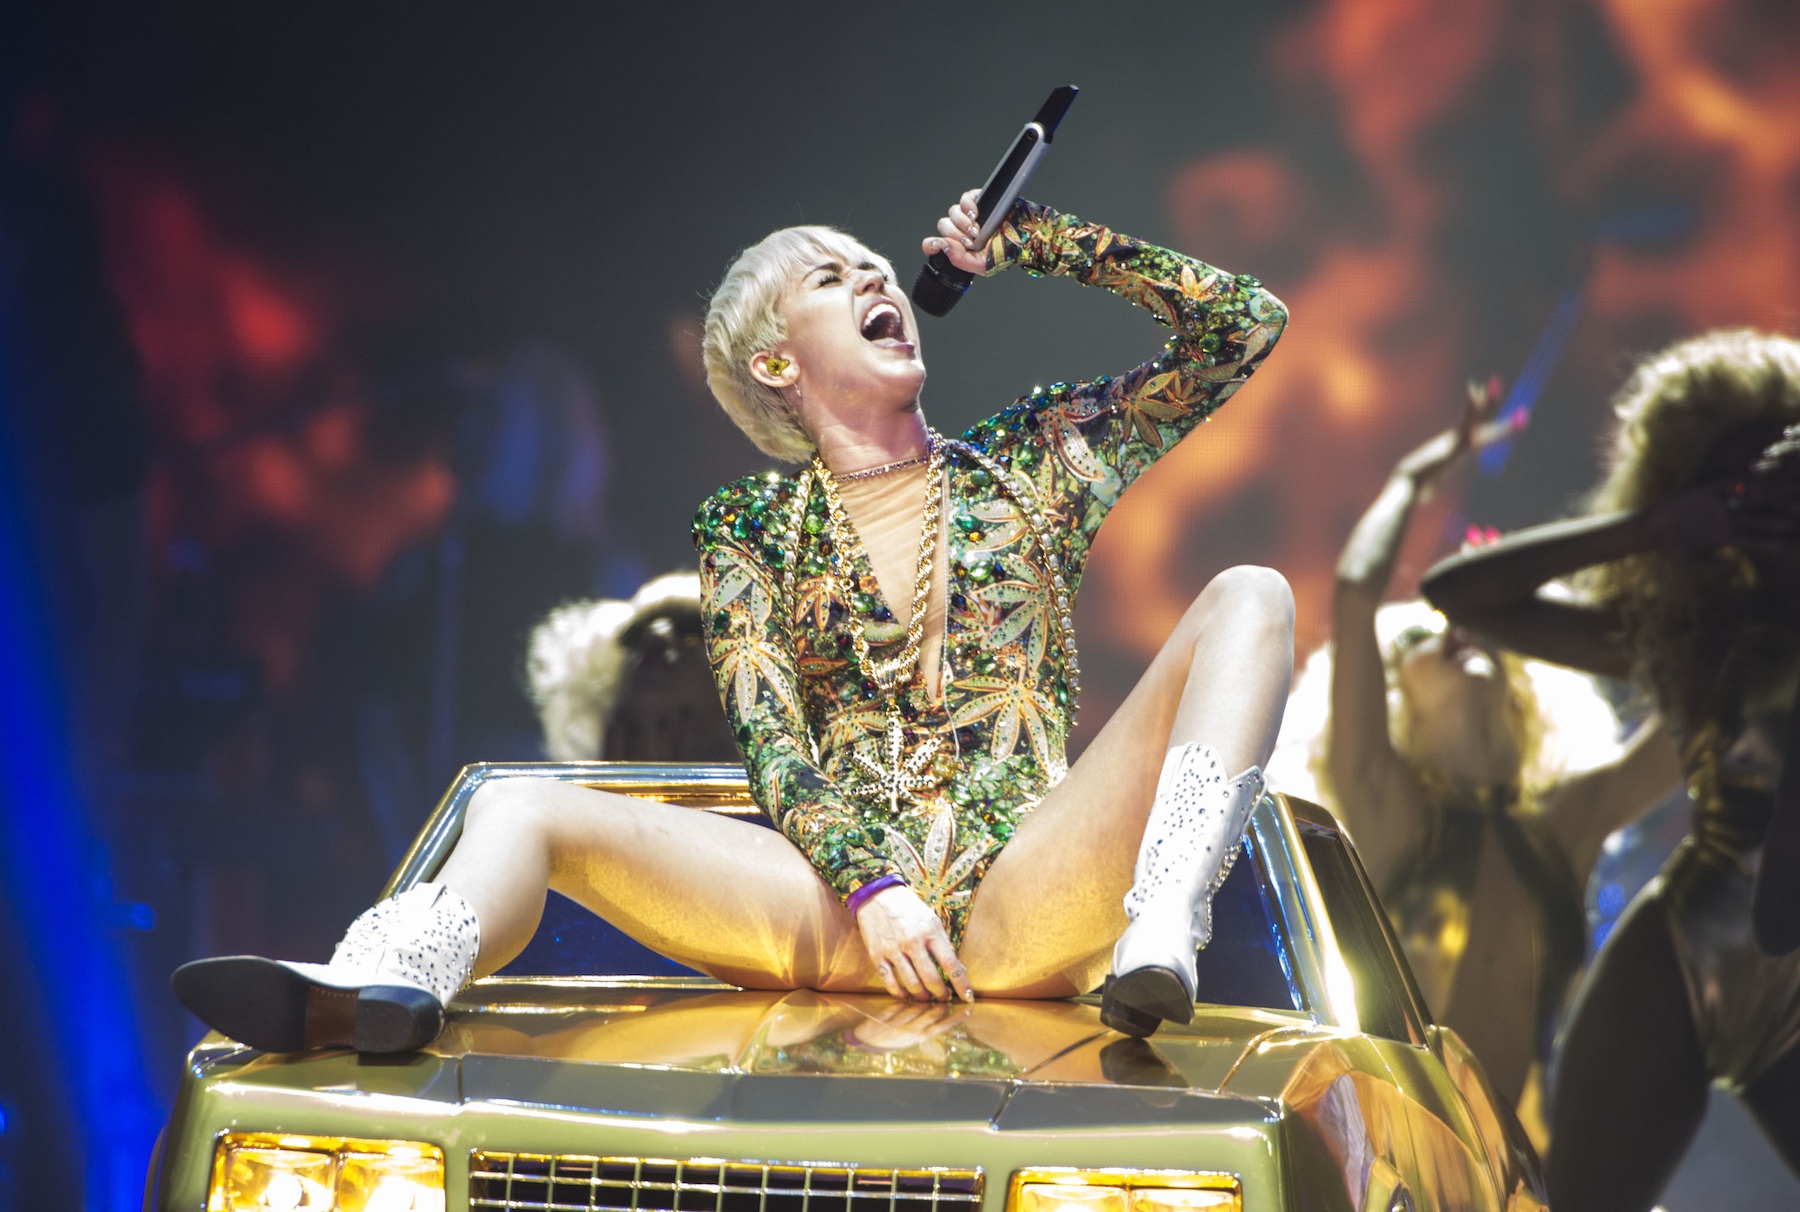 andrew martin smith recommends miley cyrus spread eagle pic